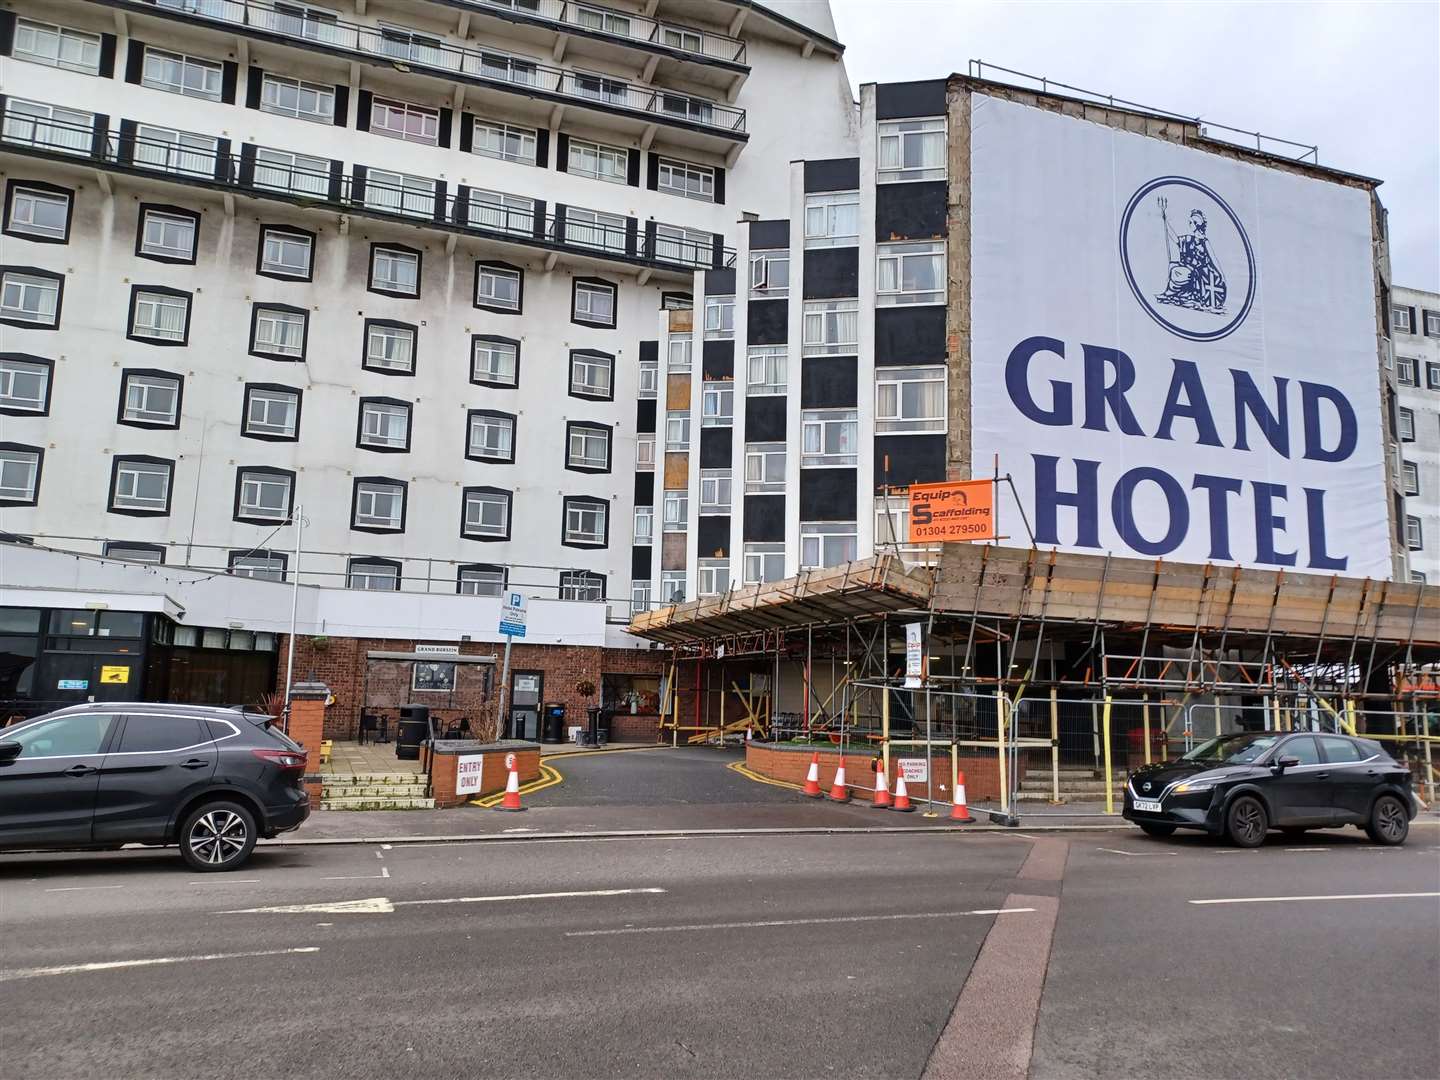 A huge material banner carrying the name Grand Hotel has appeared over the damaged frontage, where the Grand Burstin sign previously hung